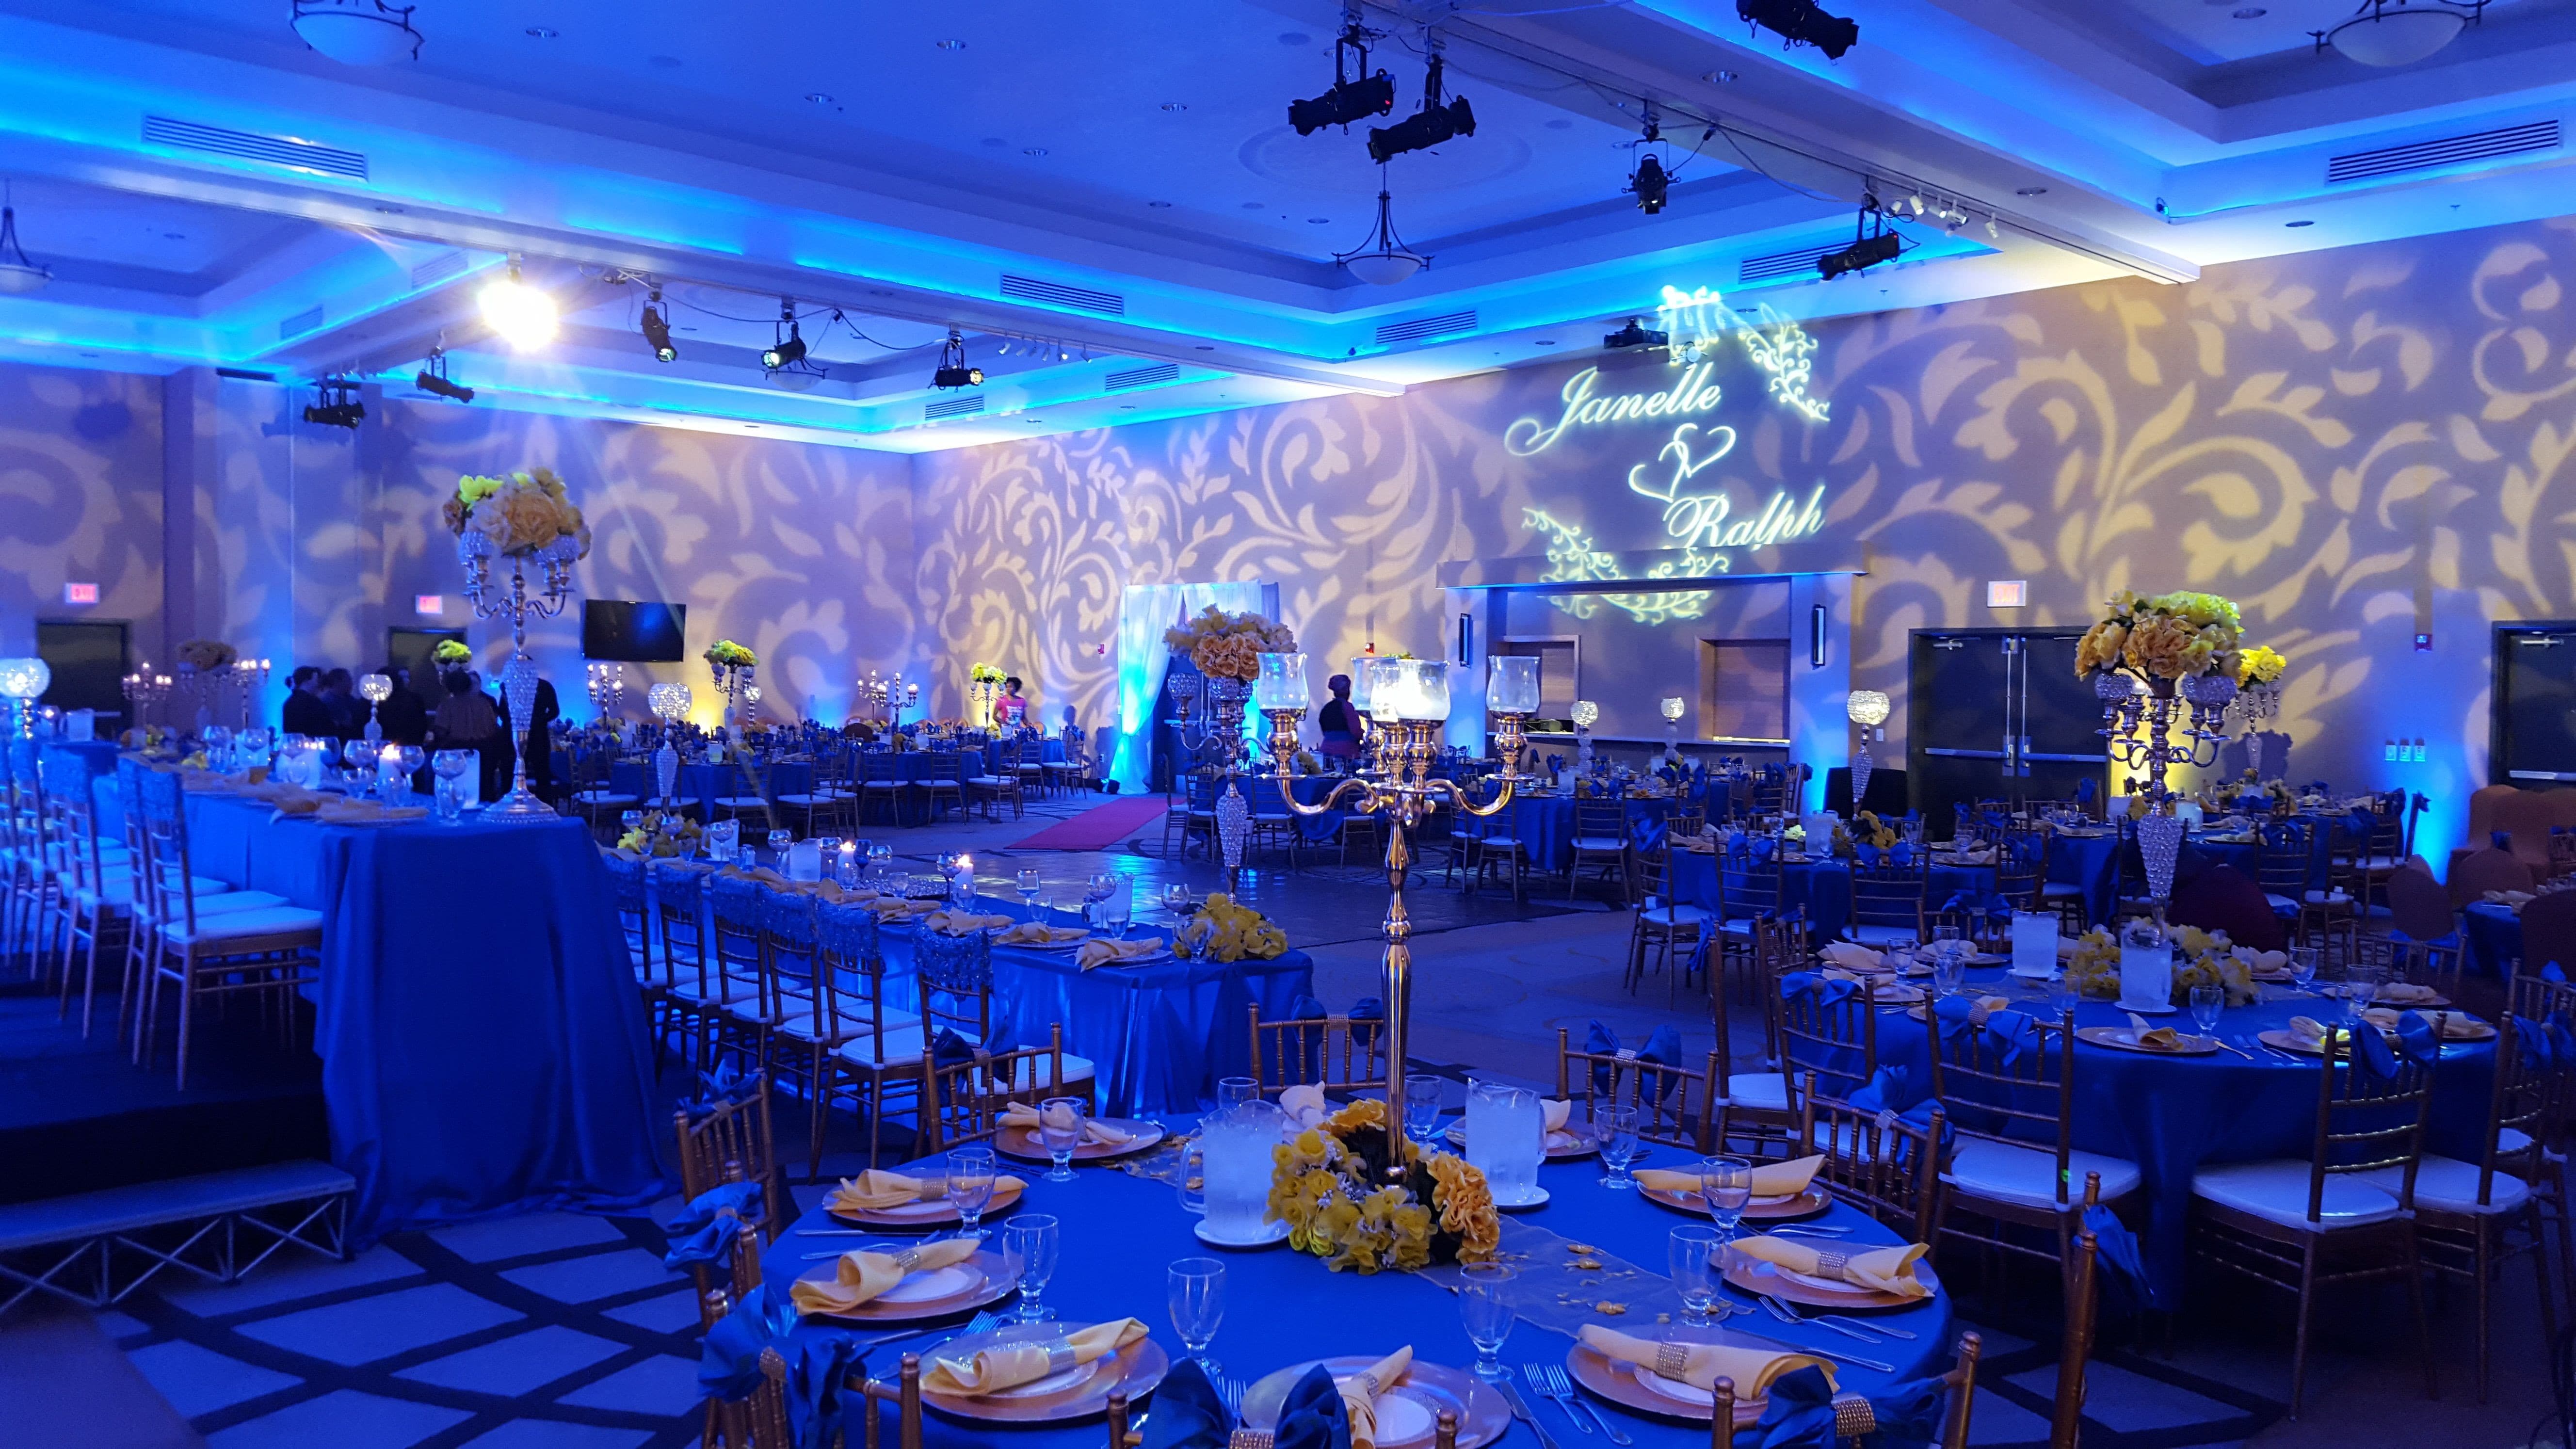 Wedding lighting with patterns on the walls.